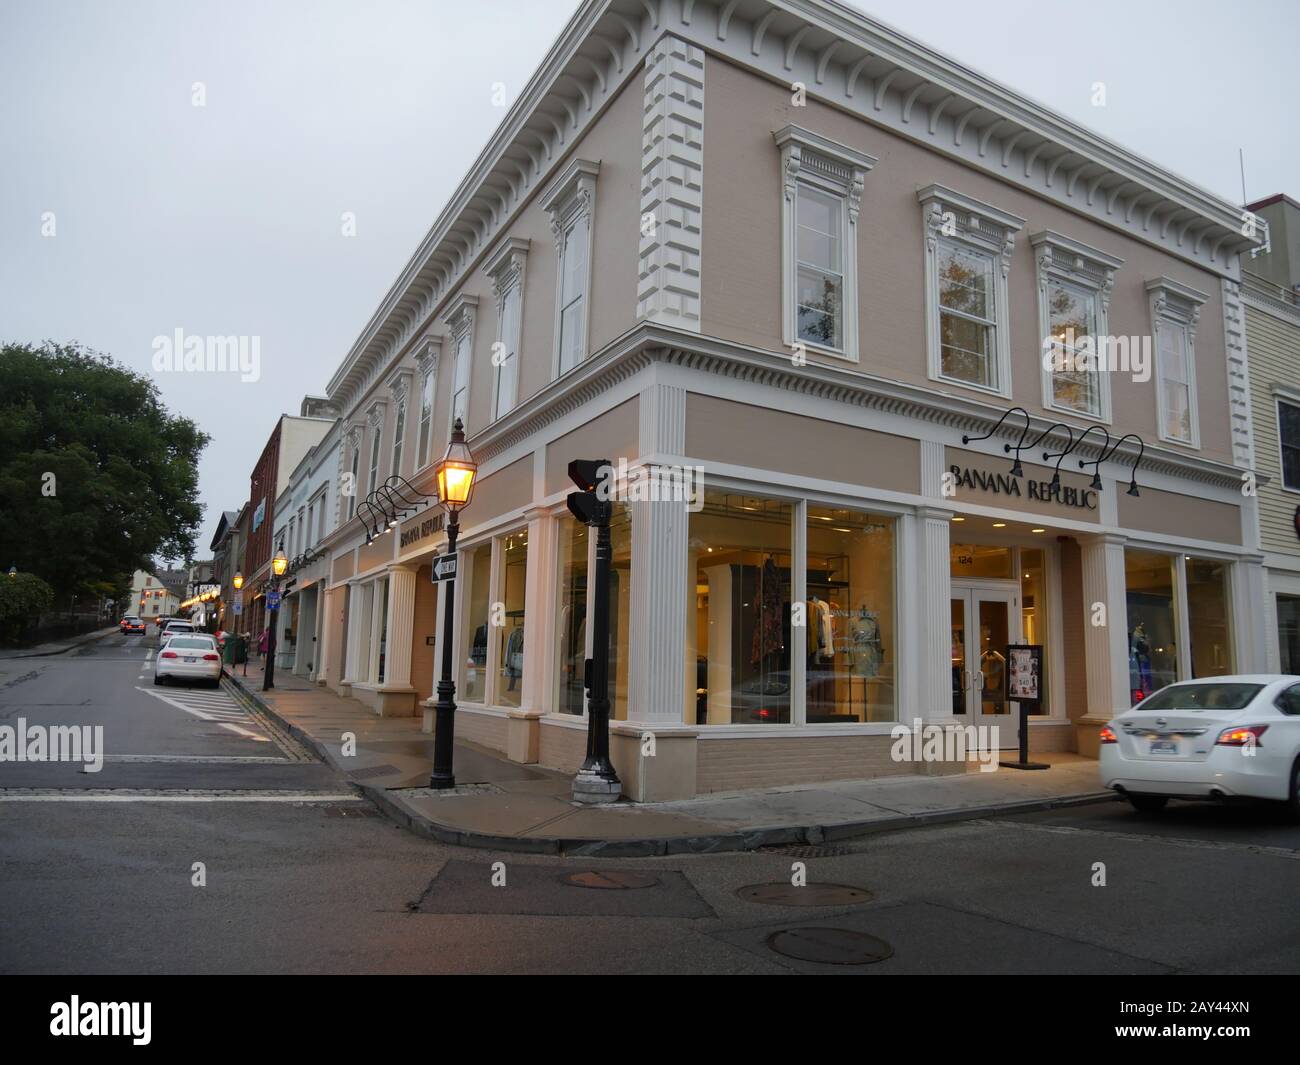 Newport, Rhode Island-September 2017: Row of high end shops carrying branded merchandise in Newport. Stock Photo